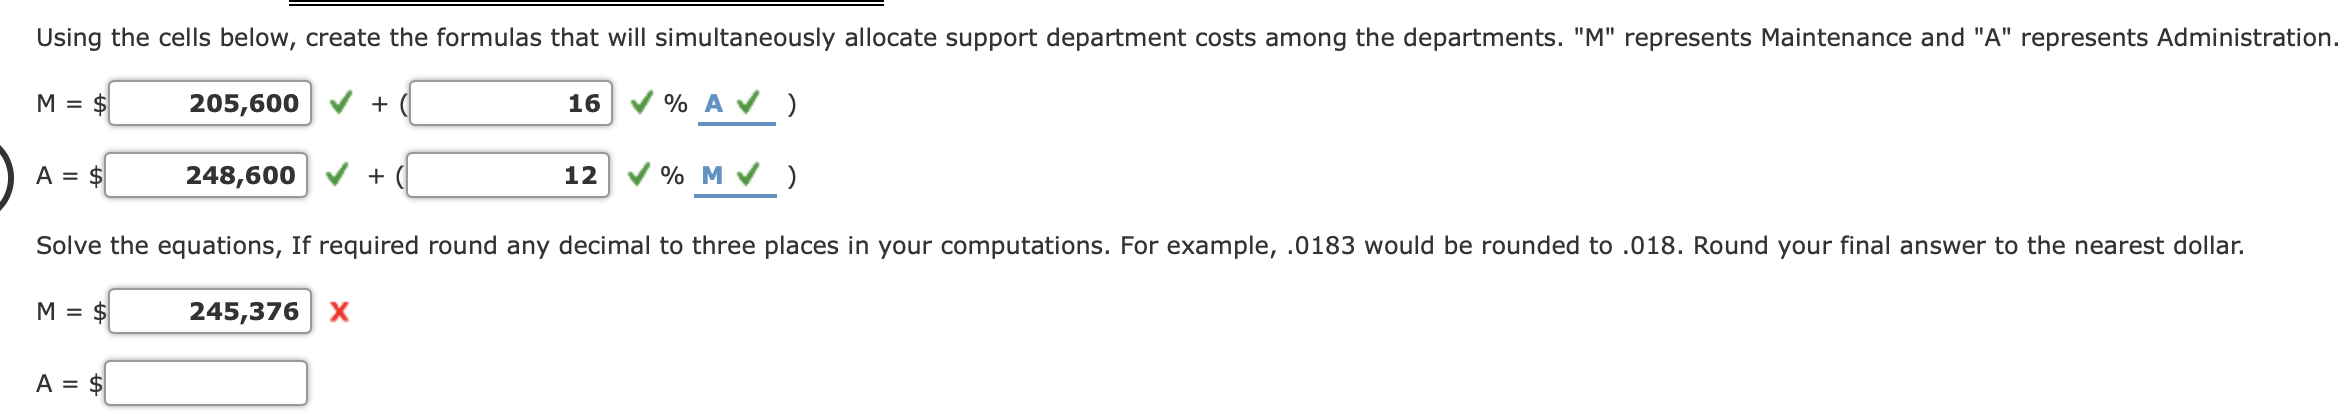 Using the cells below, create the formulas that will simultaneously allocate support department costs among the departments.